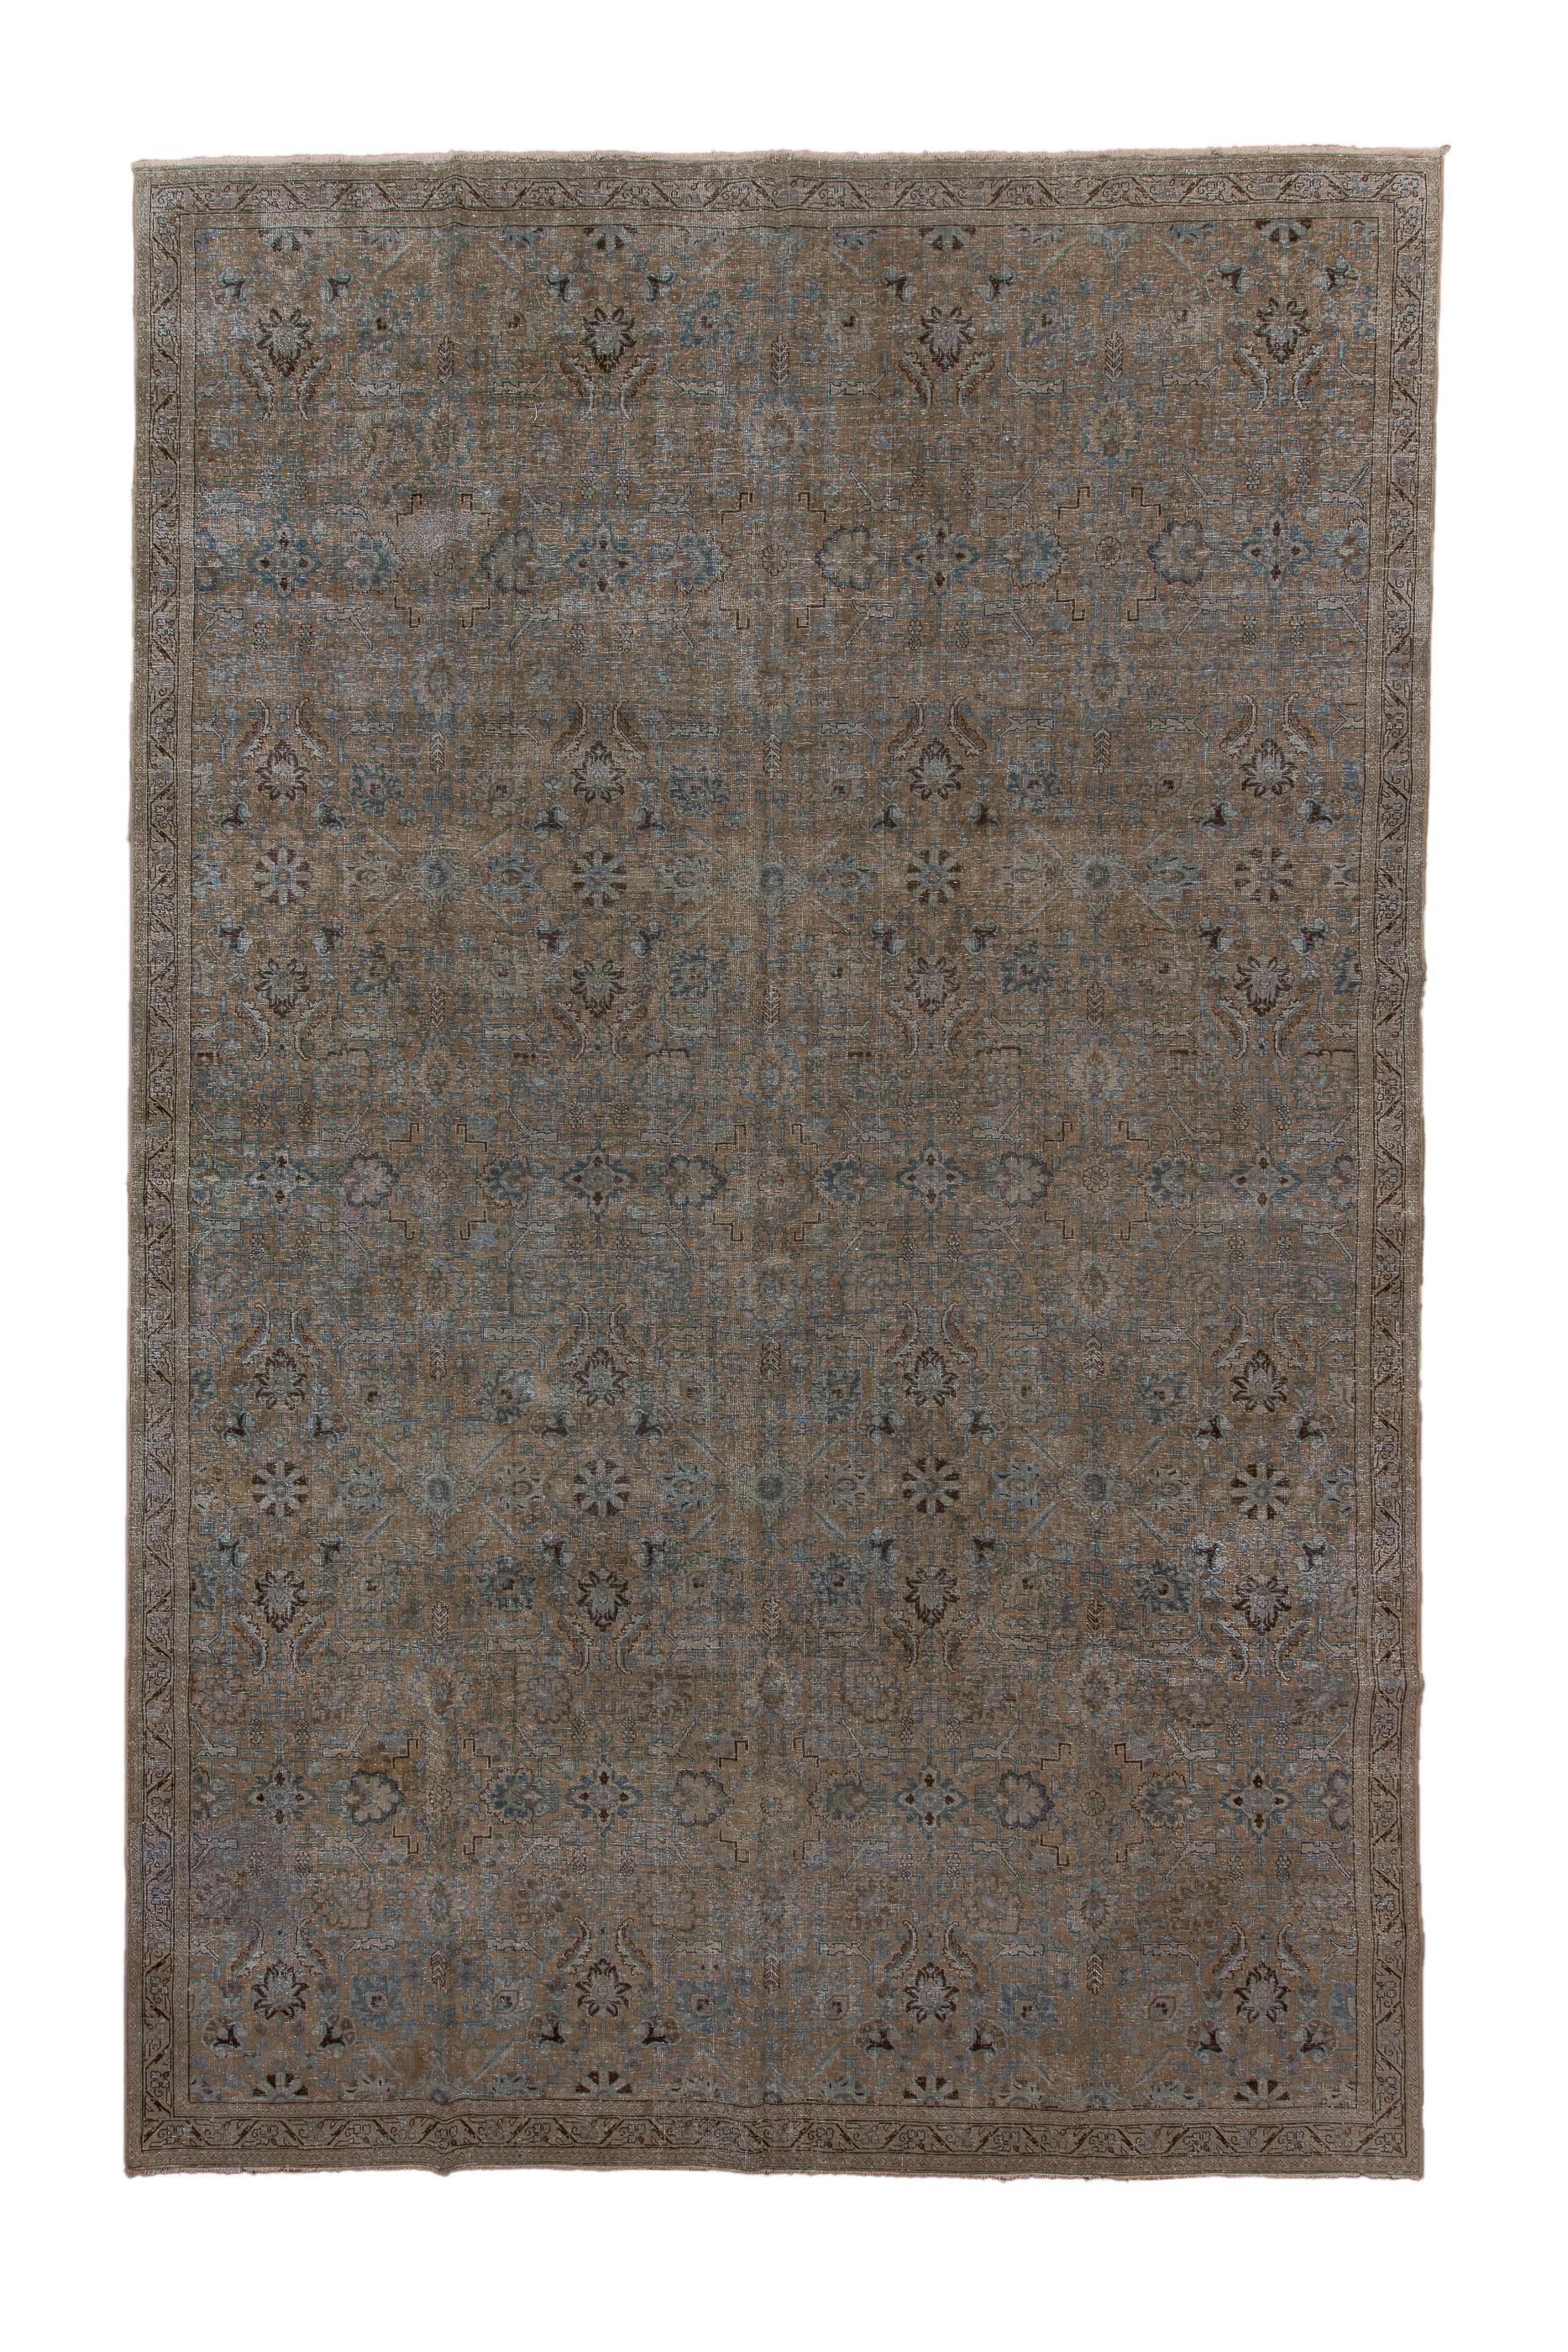 This well-woven urban carpet show a  buff field with a subdued design featuring bitonal daisy rosettes and other small-scale floral elements. Various small petal and  spade palmettes also appear. The borders are narrow, A very discrete carpet.

Rug